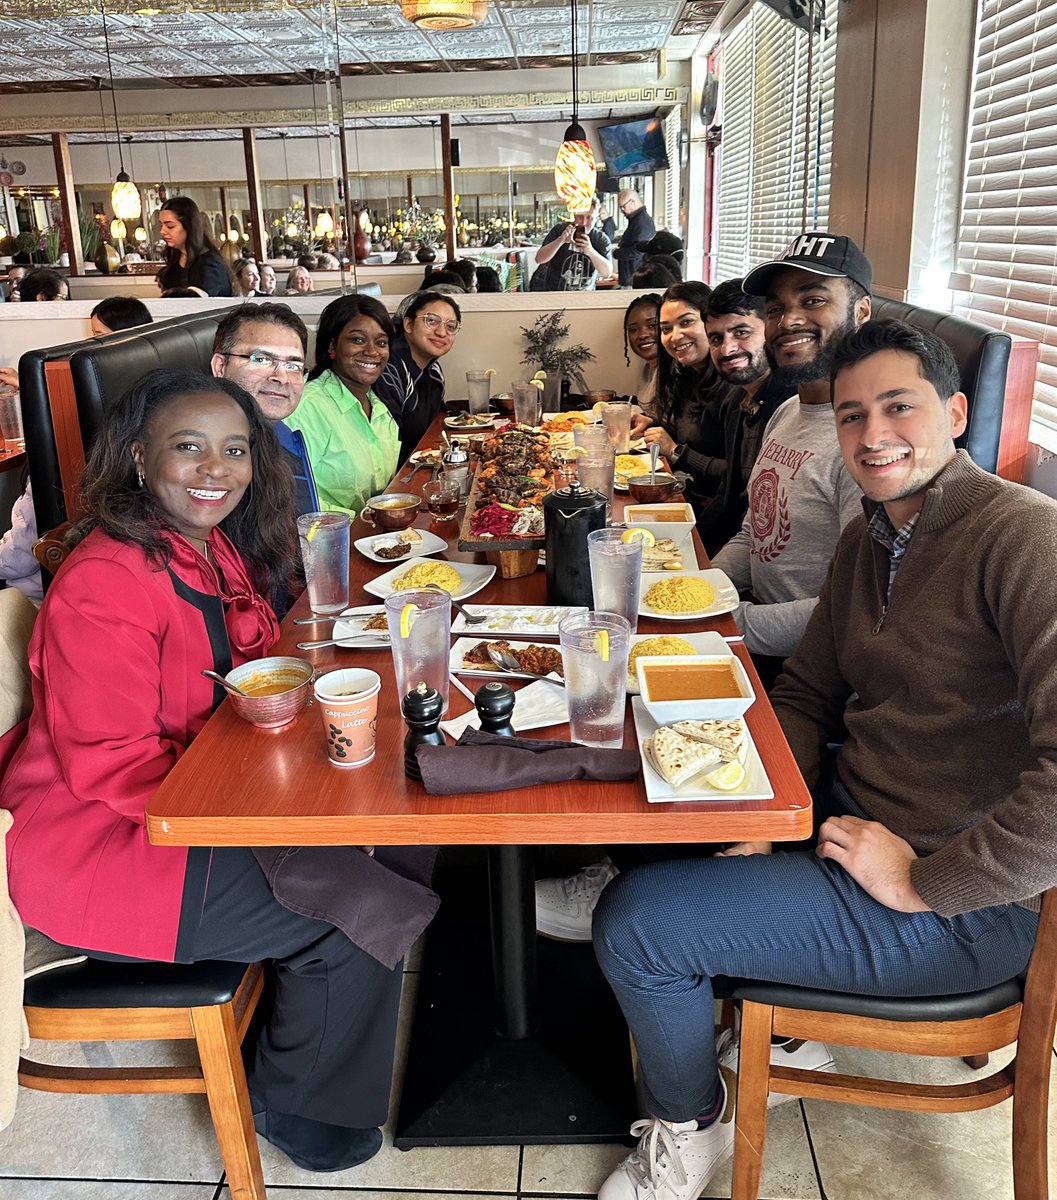 It was an amazing year with #KiraboLab.  Time to celebrate the holidays and a year of hard work. Proud to be part of this lab and work with these amazing people! @annetkiraboc1 @Mohamma91591696 @_SydneyJamison @PorciaHaynes @Naome2Naome @ShariaYasmin @drtasir2011 @DoctorAlbritton